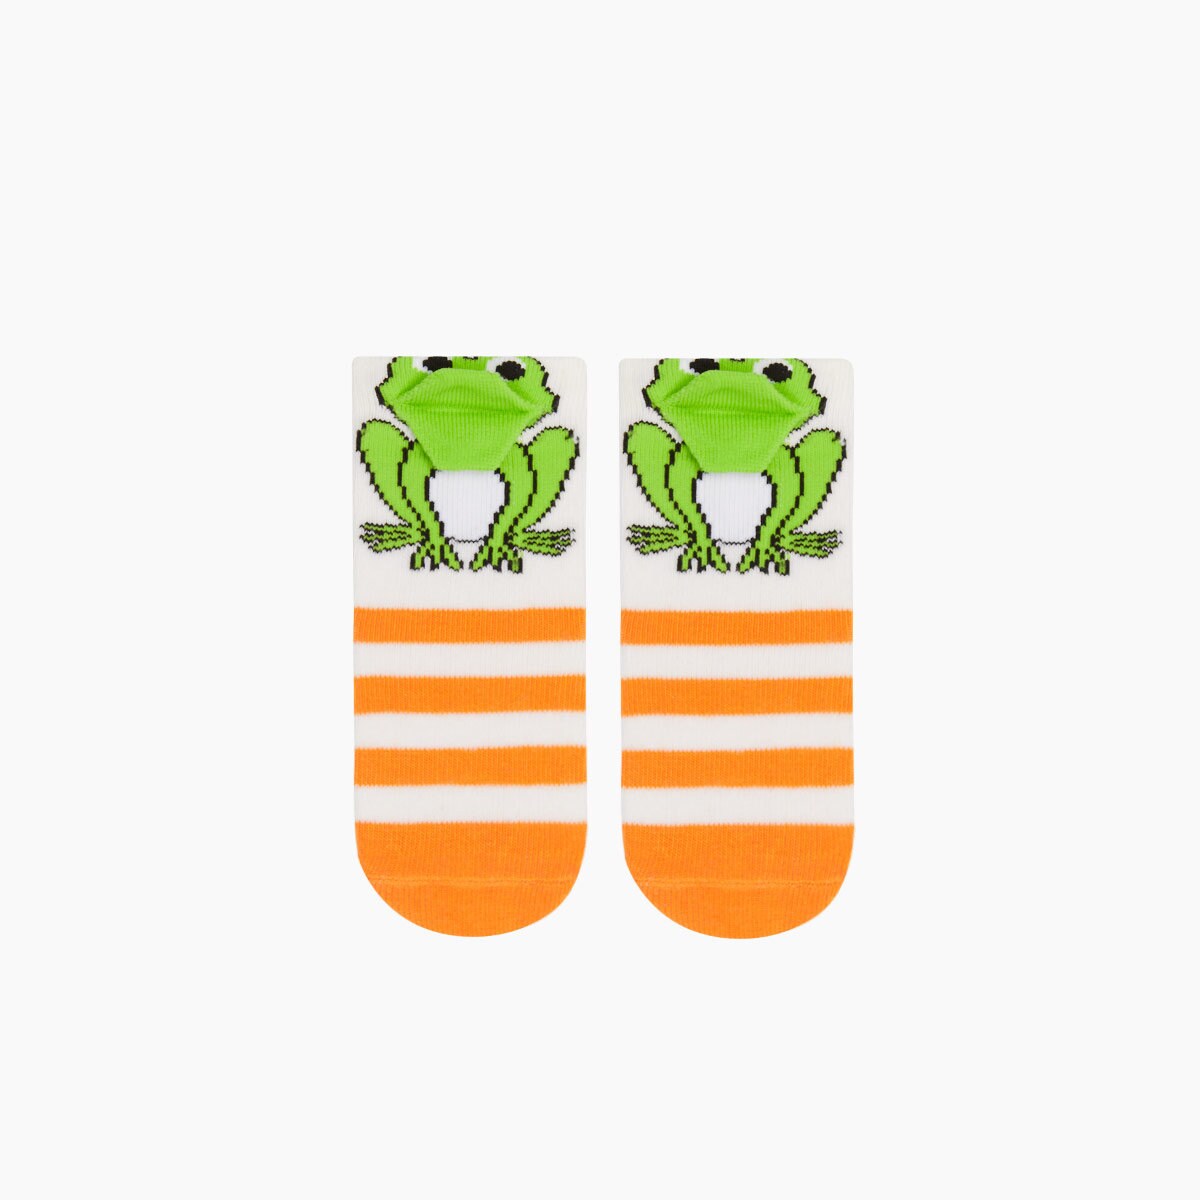 Baby Socks, 3D Frog Newborn Striped Sock, Gender-Neutral Kids' Clothing, Baby Shower Gift, New Baby Gift, Baby Announcement, Animal Pattern